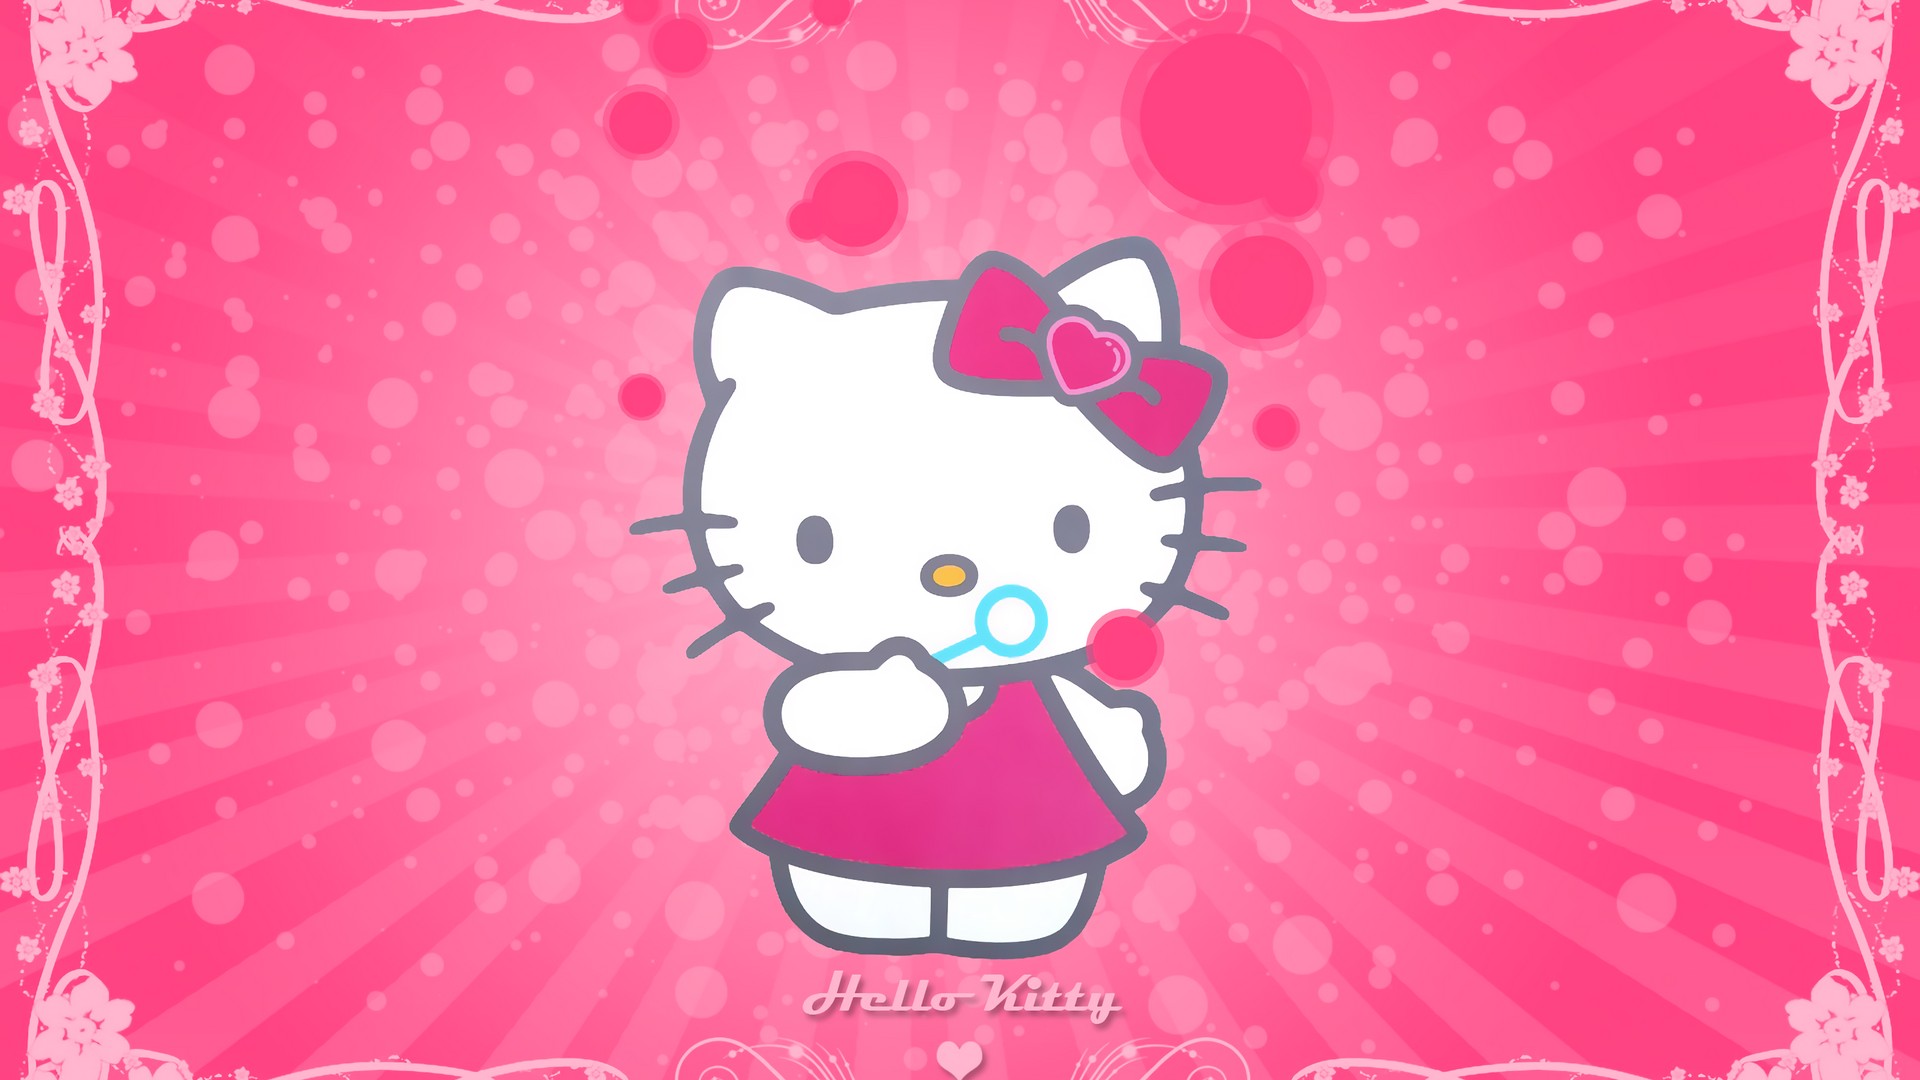 Hello Kitty Pictures Wallpaper HD with image resolution 1920x1080 pixel. You can make this wallpaper for your Desktop Computer Backgrounds, Mac Wallpapers, Android Lock screen or iPhone Screensavers